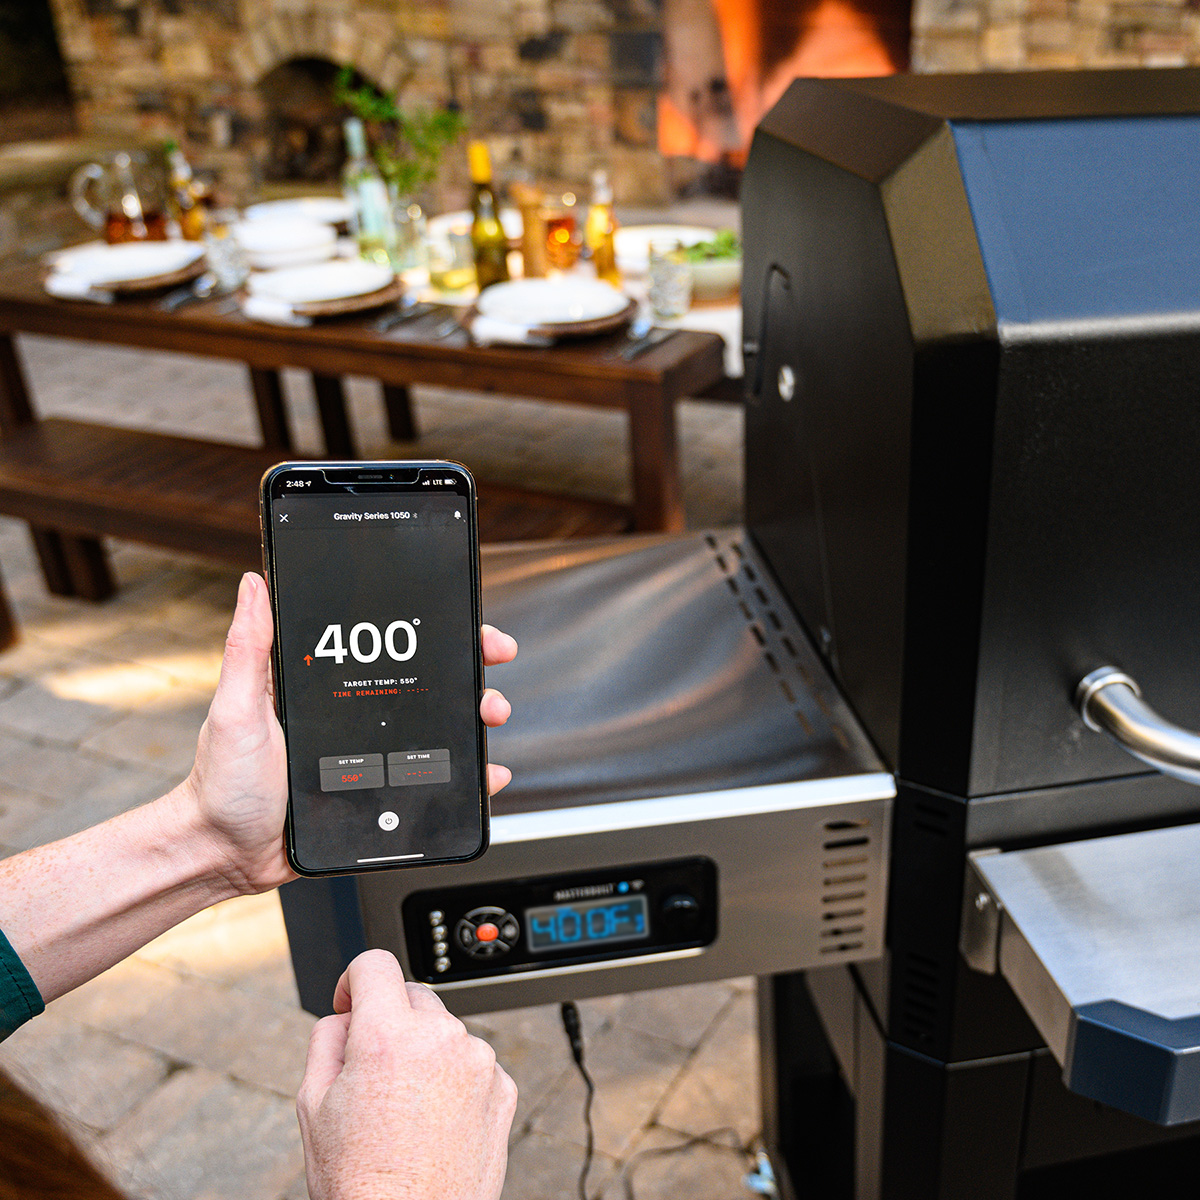 Set it and go with your smart device. Learn to master the art of smoking, grilling and more with the Masterbuilt App.